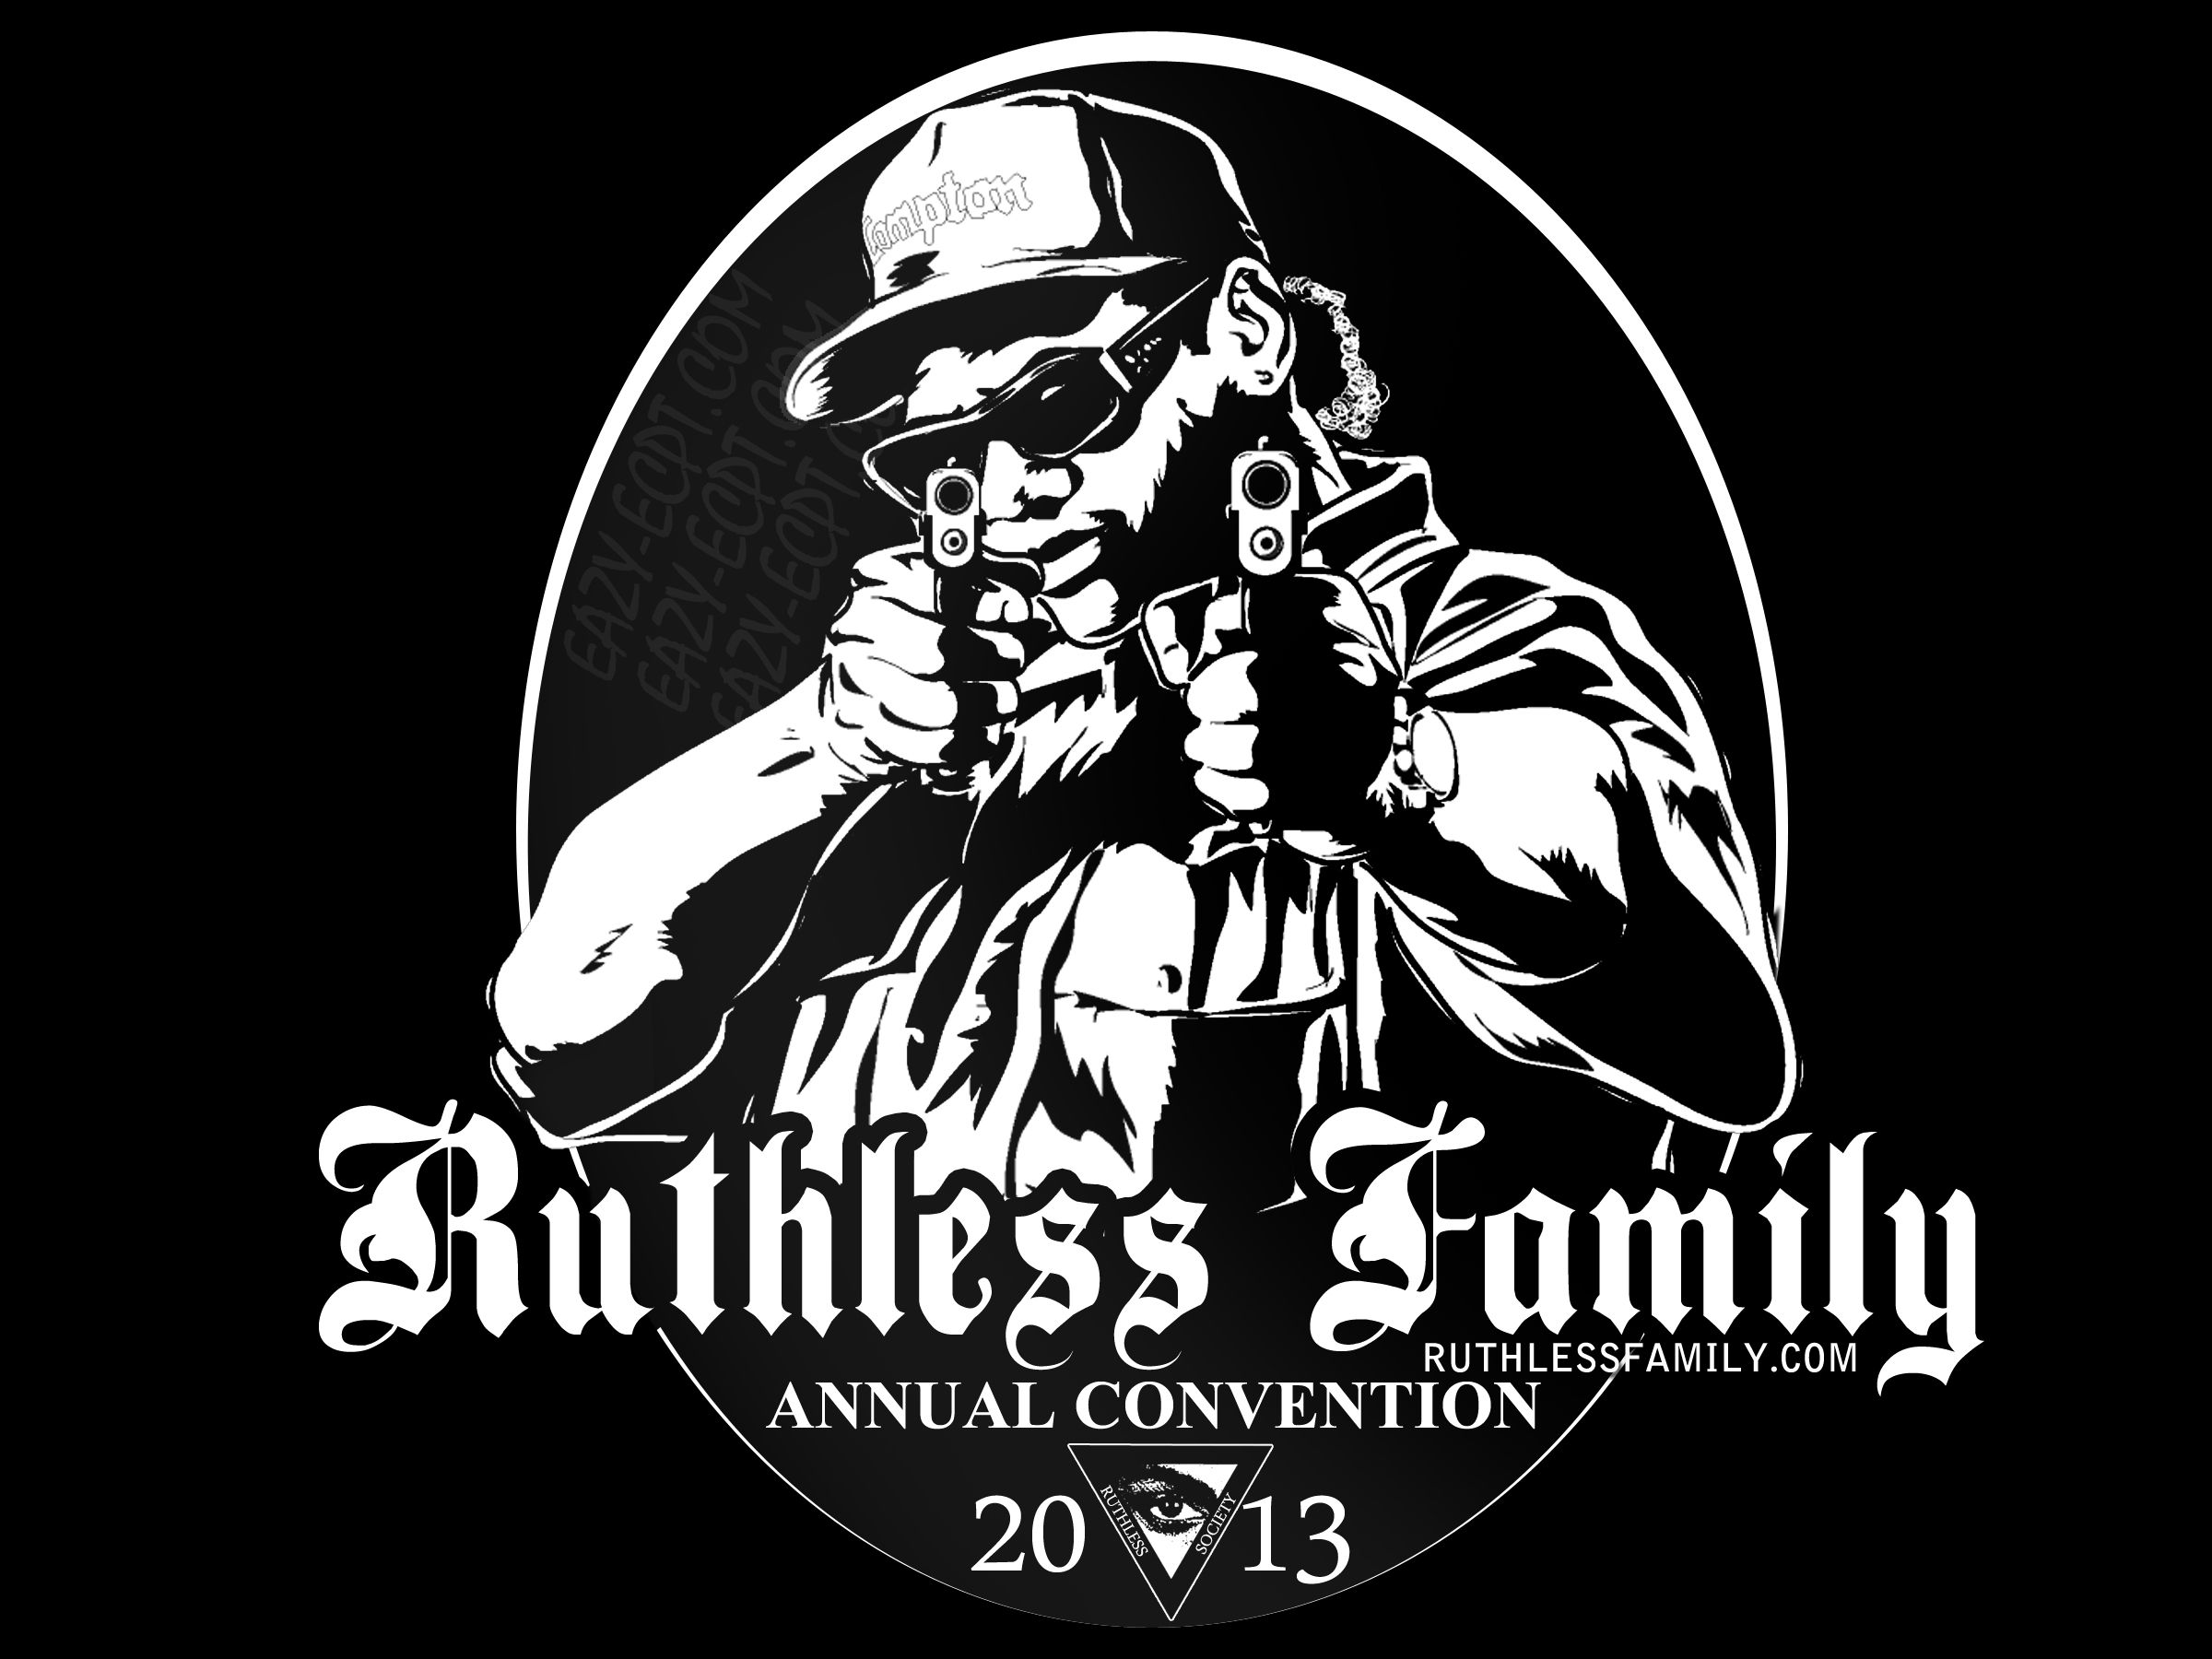 Ruthless Records Wallpaper. Ruthless Records Wallpaper, Ruthless Wallpaper and Ruthless Death Row Bad Boy Wallpaper